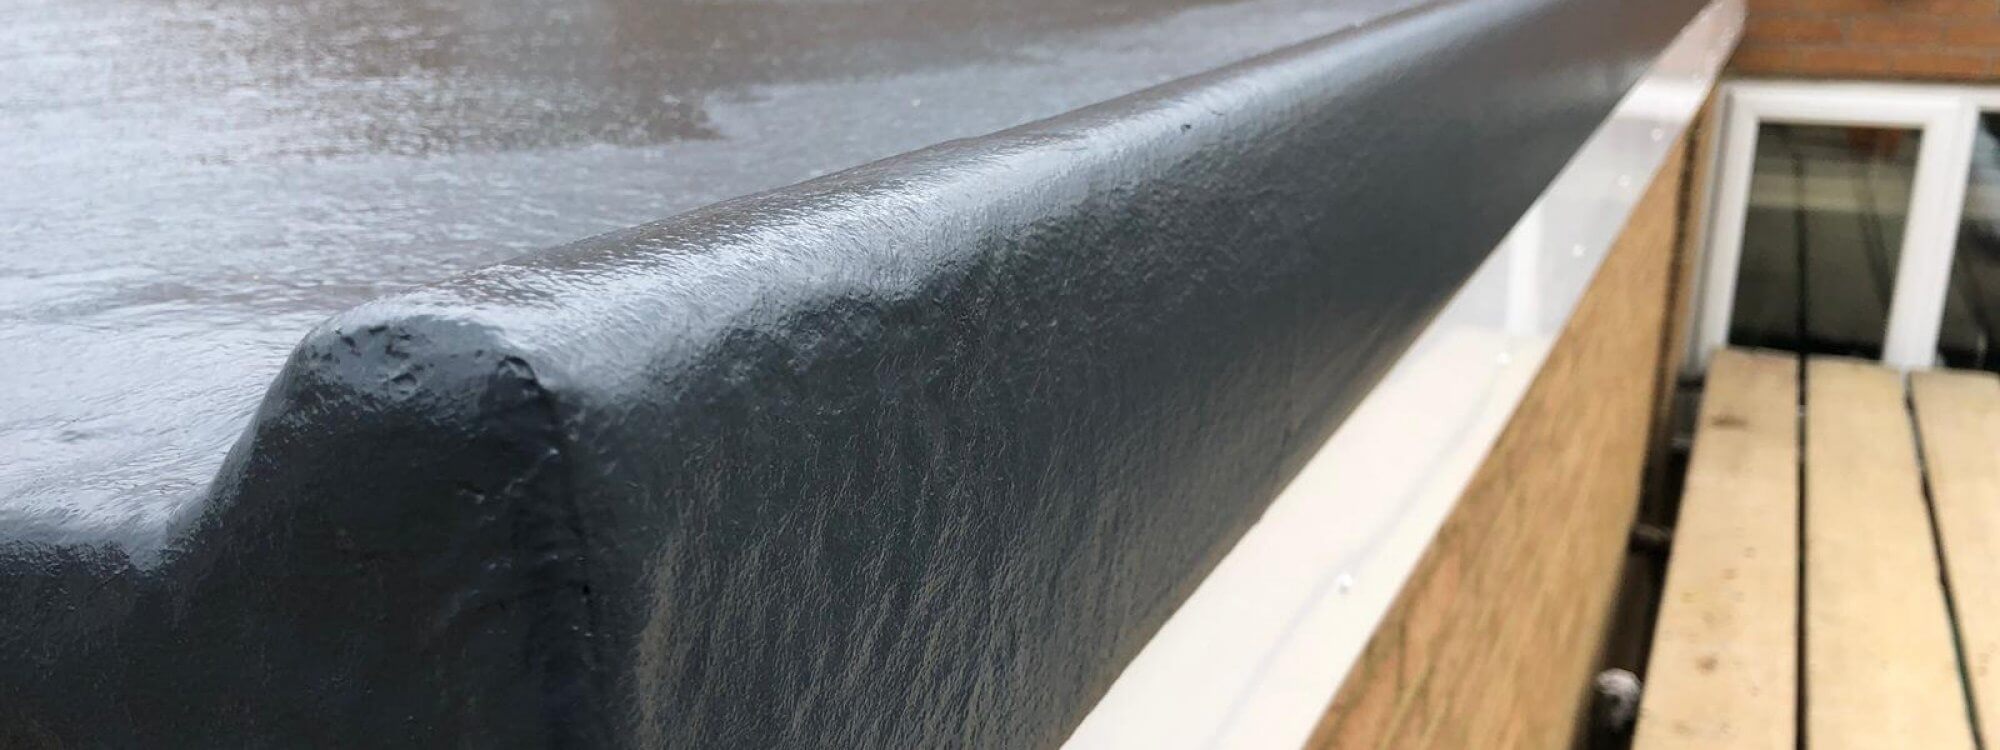 CrysticROOF Premier produces high quality GRP roof for local Scott Bader UK residents